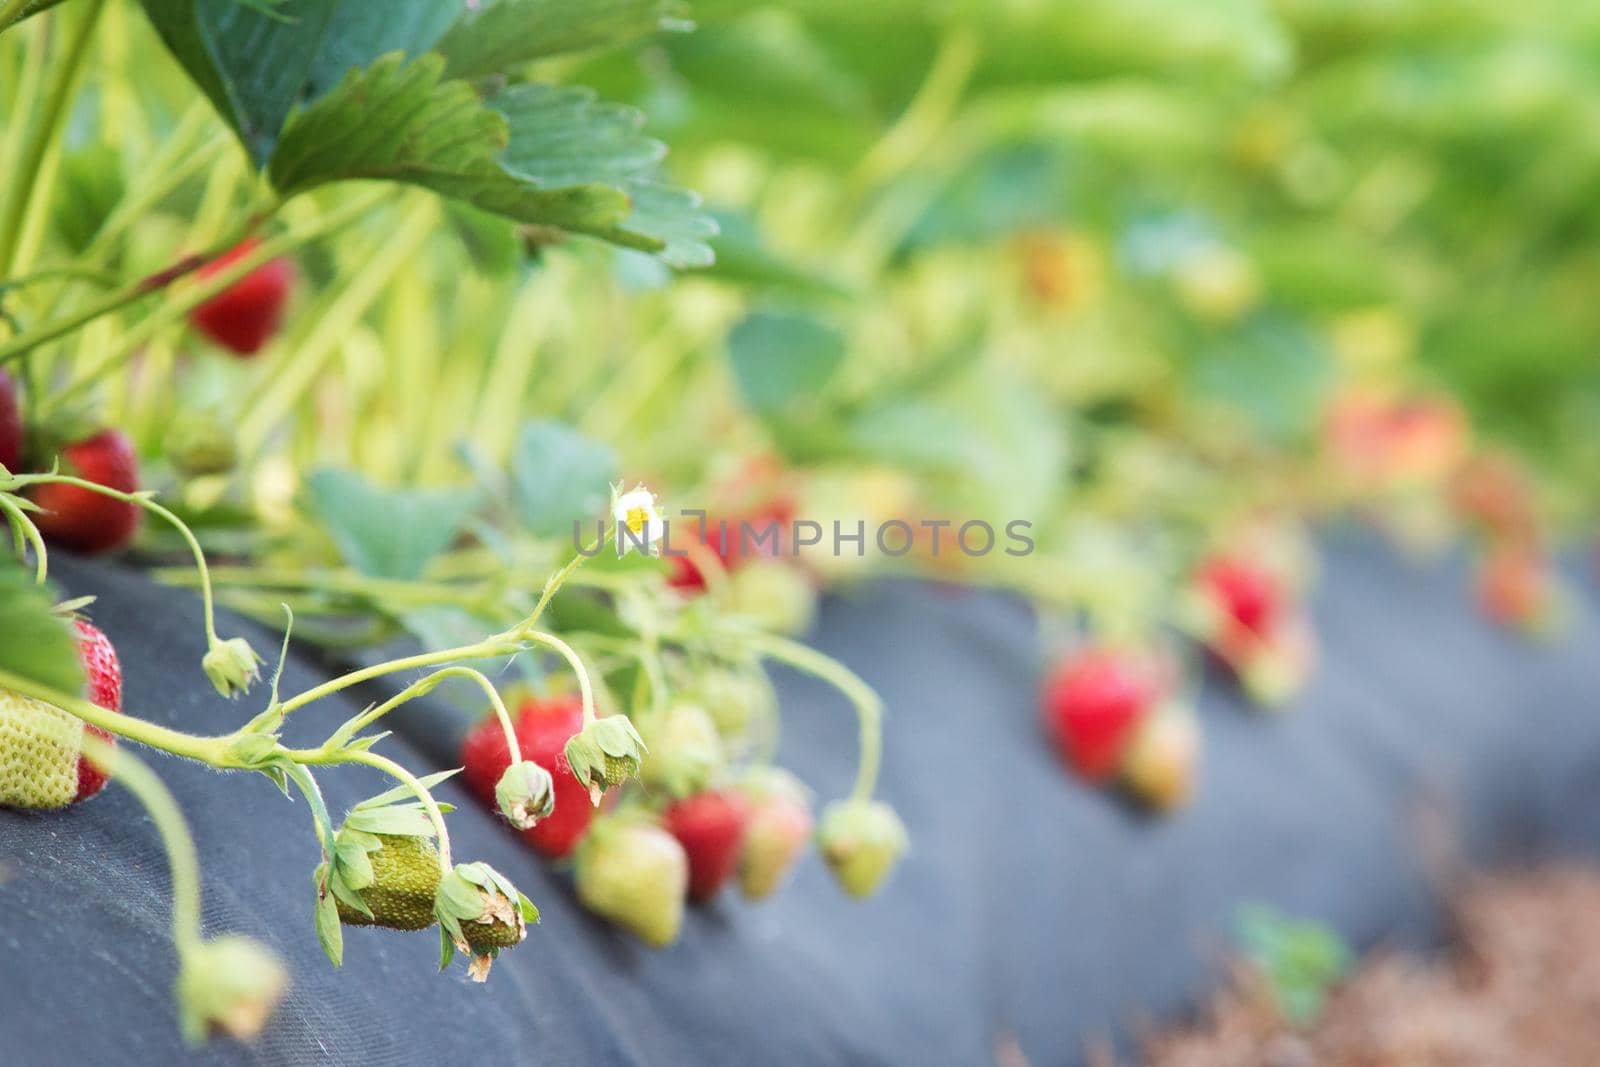 Blooming strawberry flower with many ripe and unripe berries on background